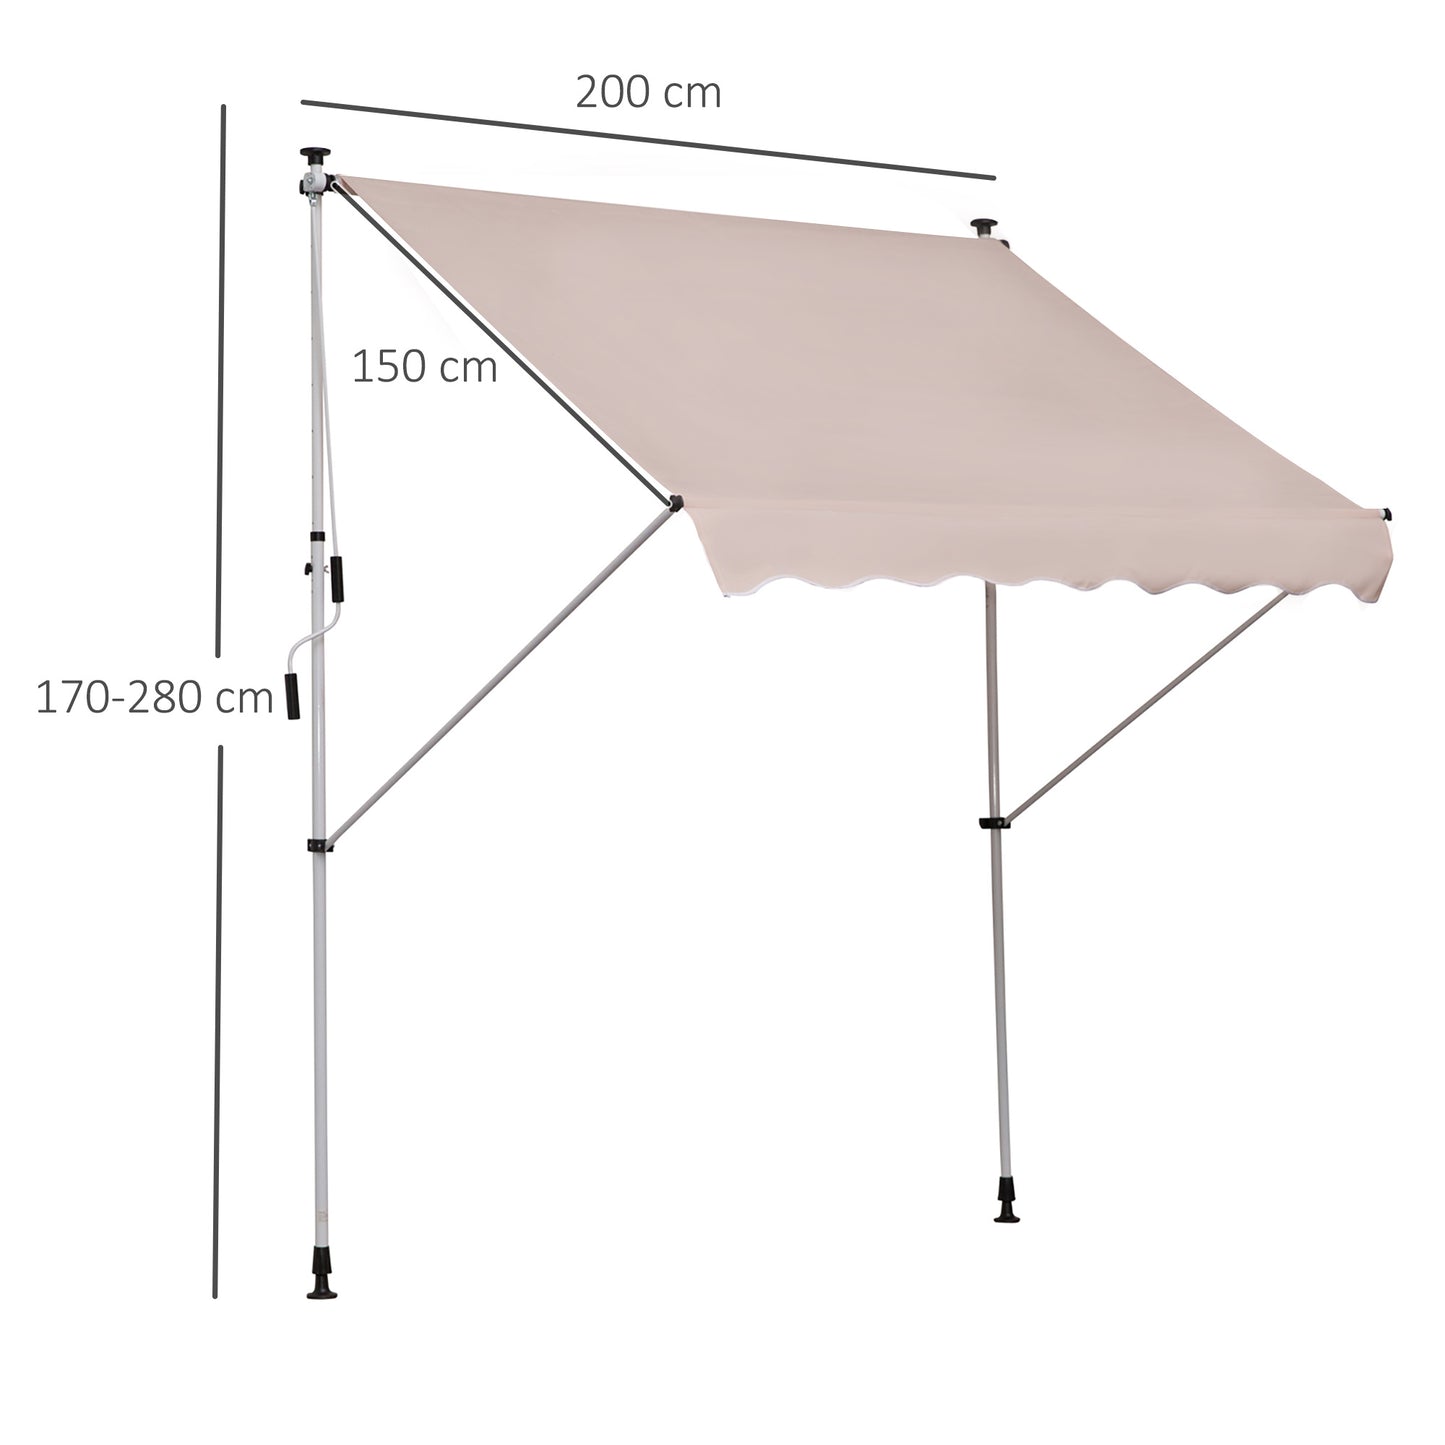 Outsunny 2x1.5m  Adjustable Outdoor Aluminium Frame Awning Beige